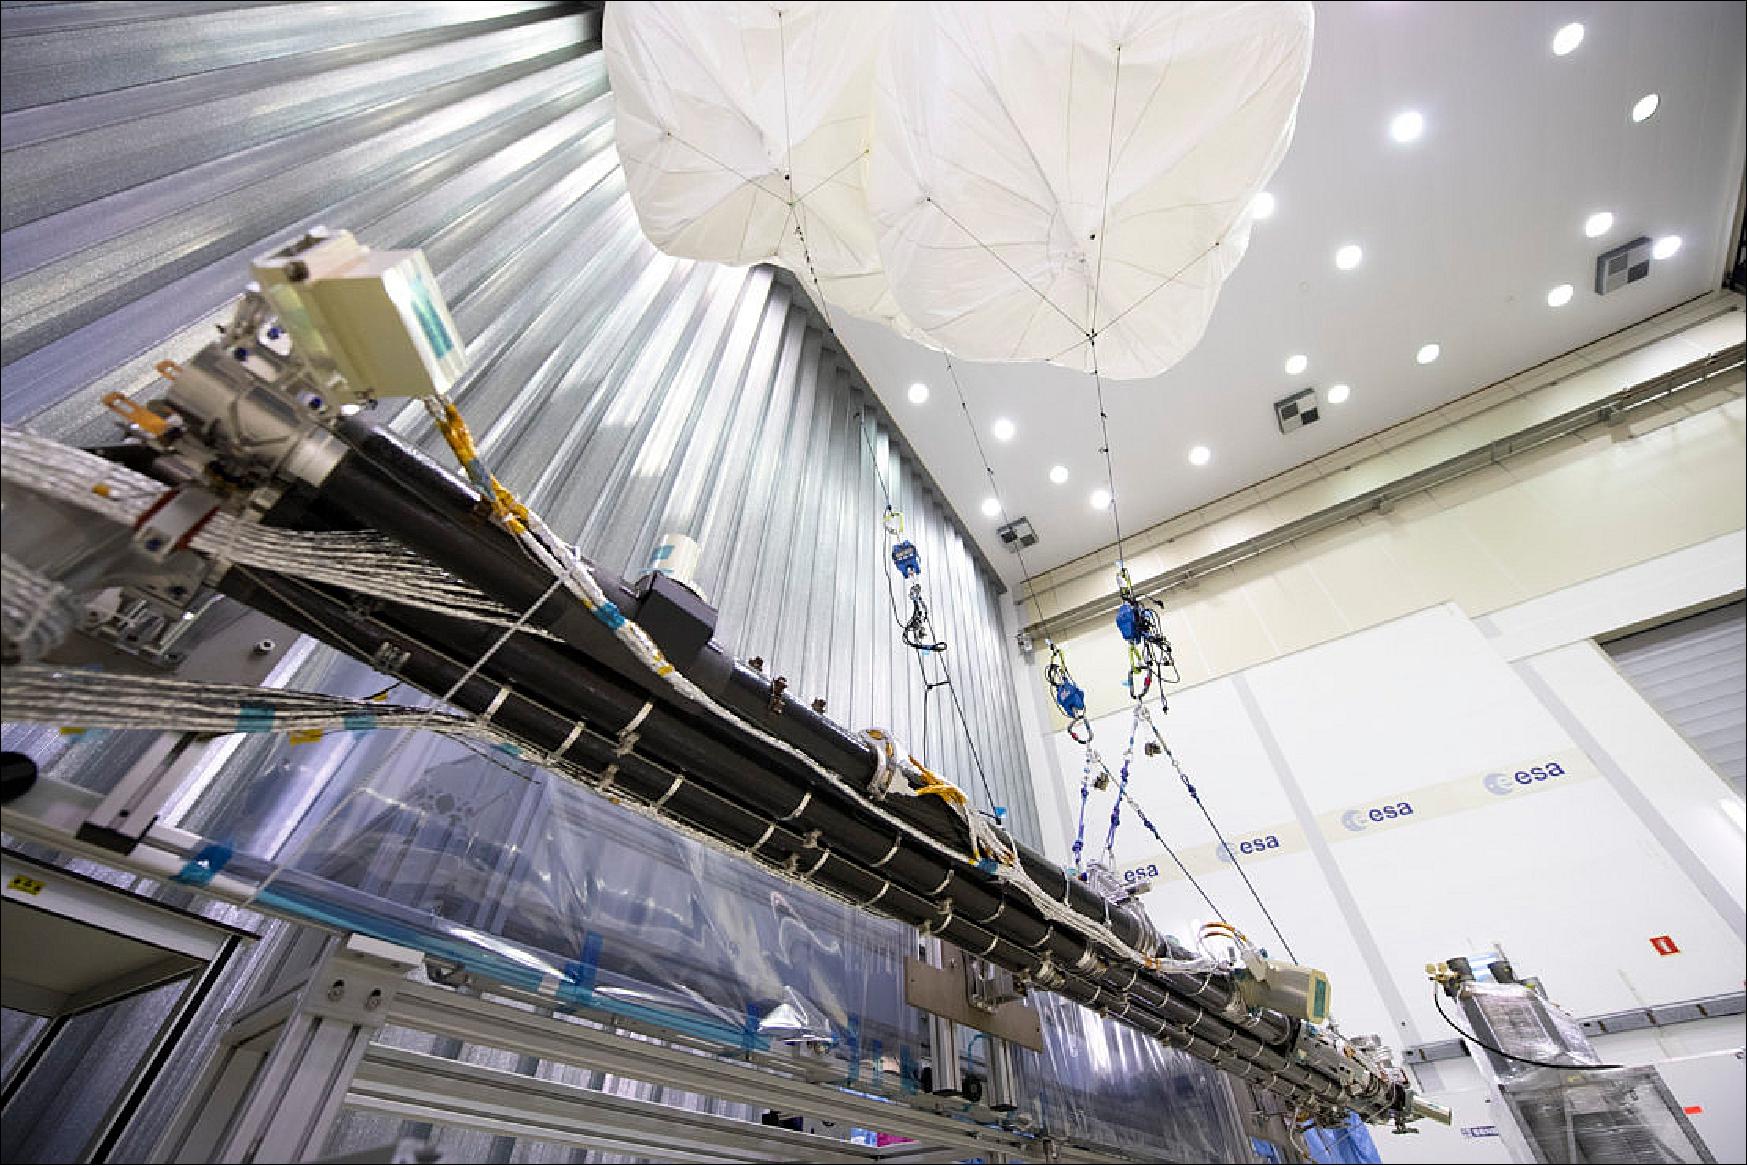 Figure 24: A test version of the 10.5 m long magnetometer boom built for ESA's mission to Jupiter, developed by SENER in Spain, seen being tested at ESA's Test Center in the Netherlands, its weight borne by balloons (image credit: ESA–G. Porter, CC BY-SA 3.0 IGO)